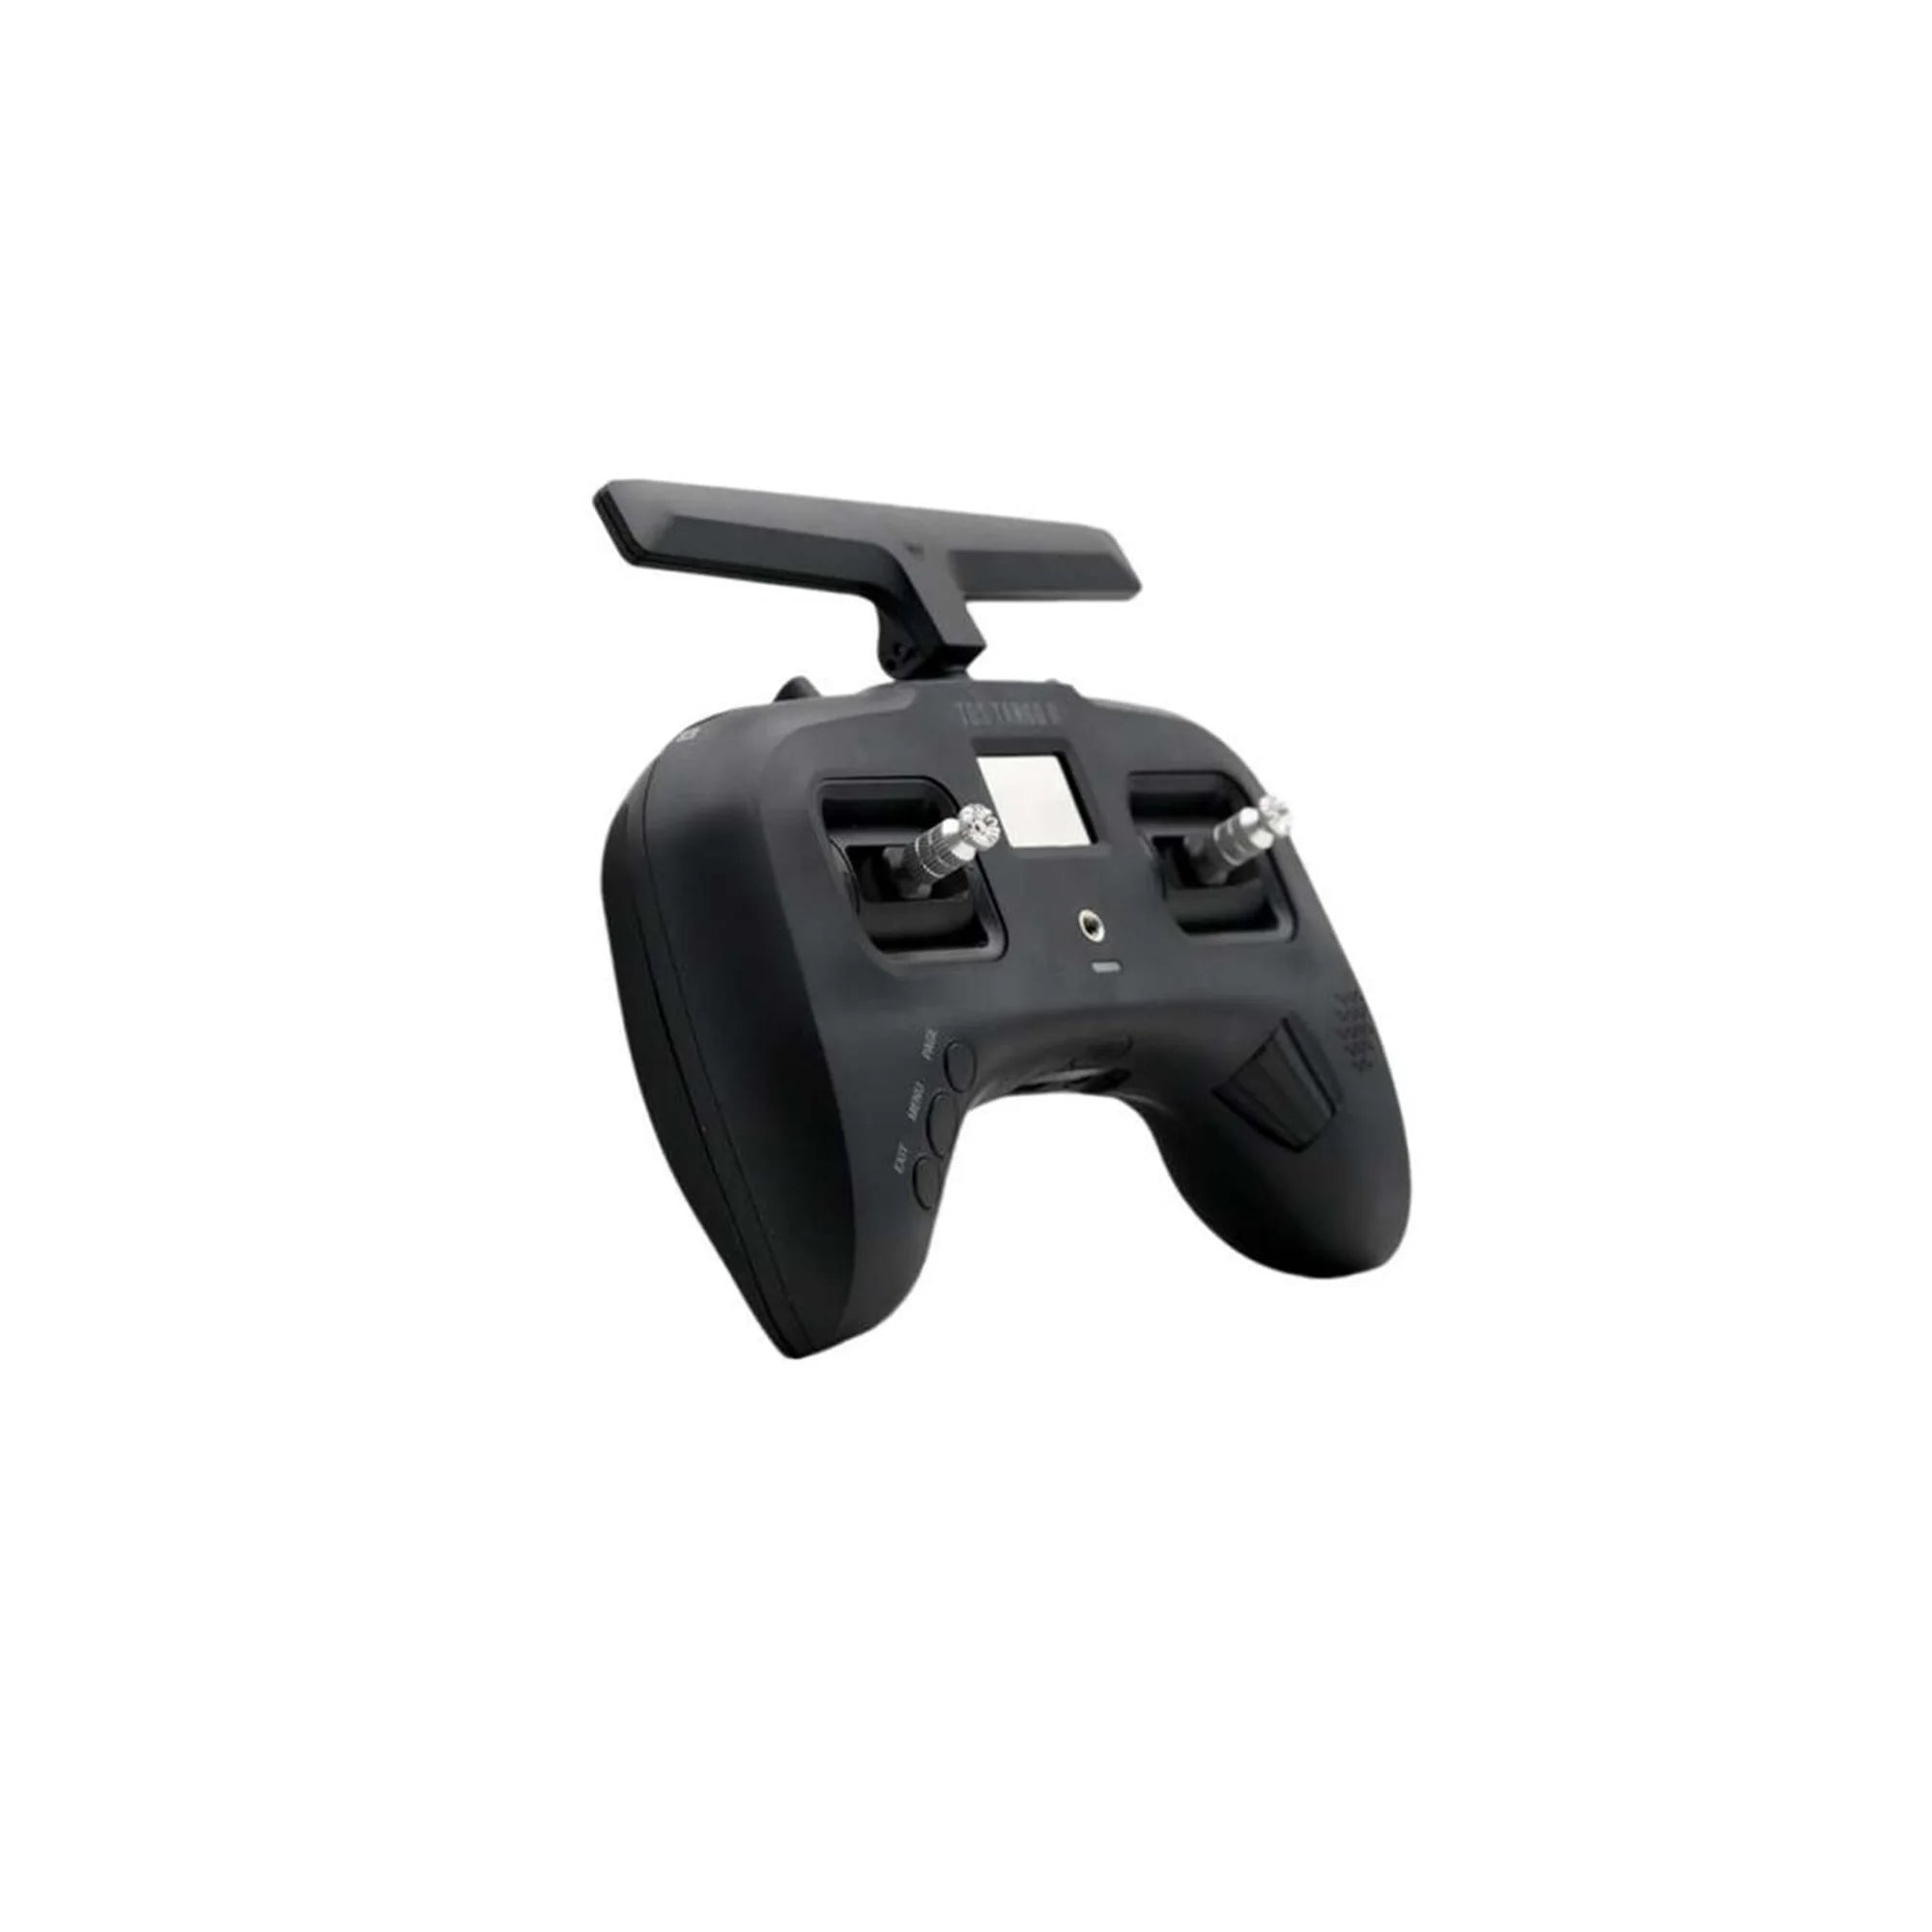 controller was designed from the ground up for R/C!